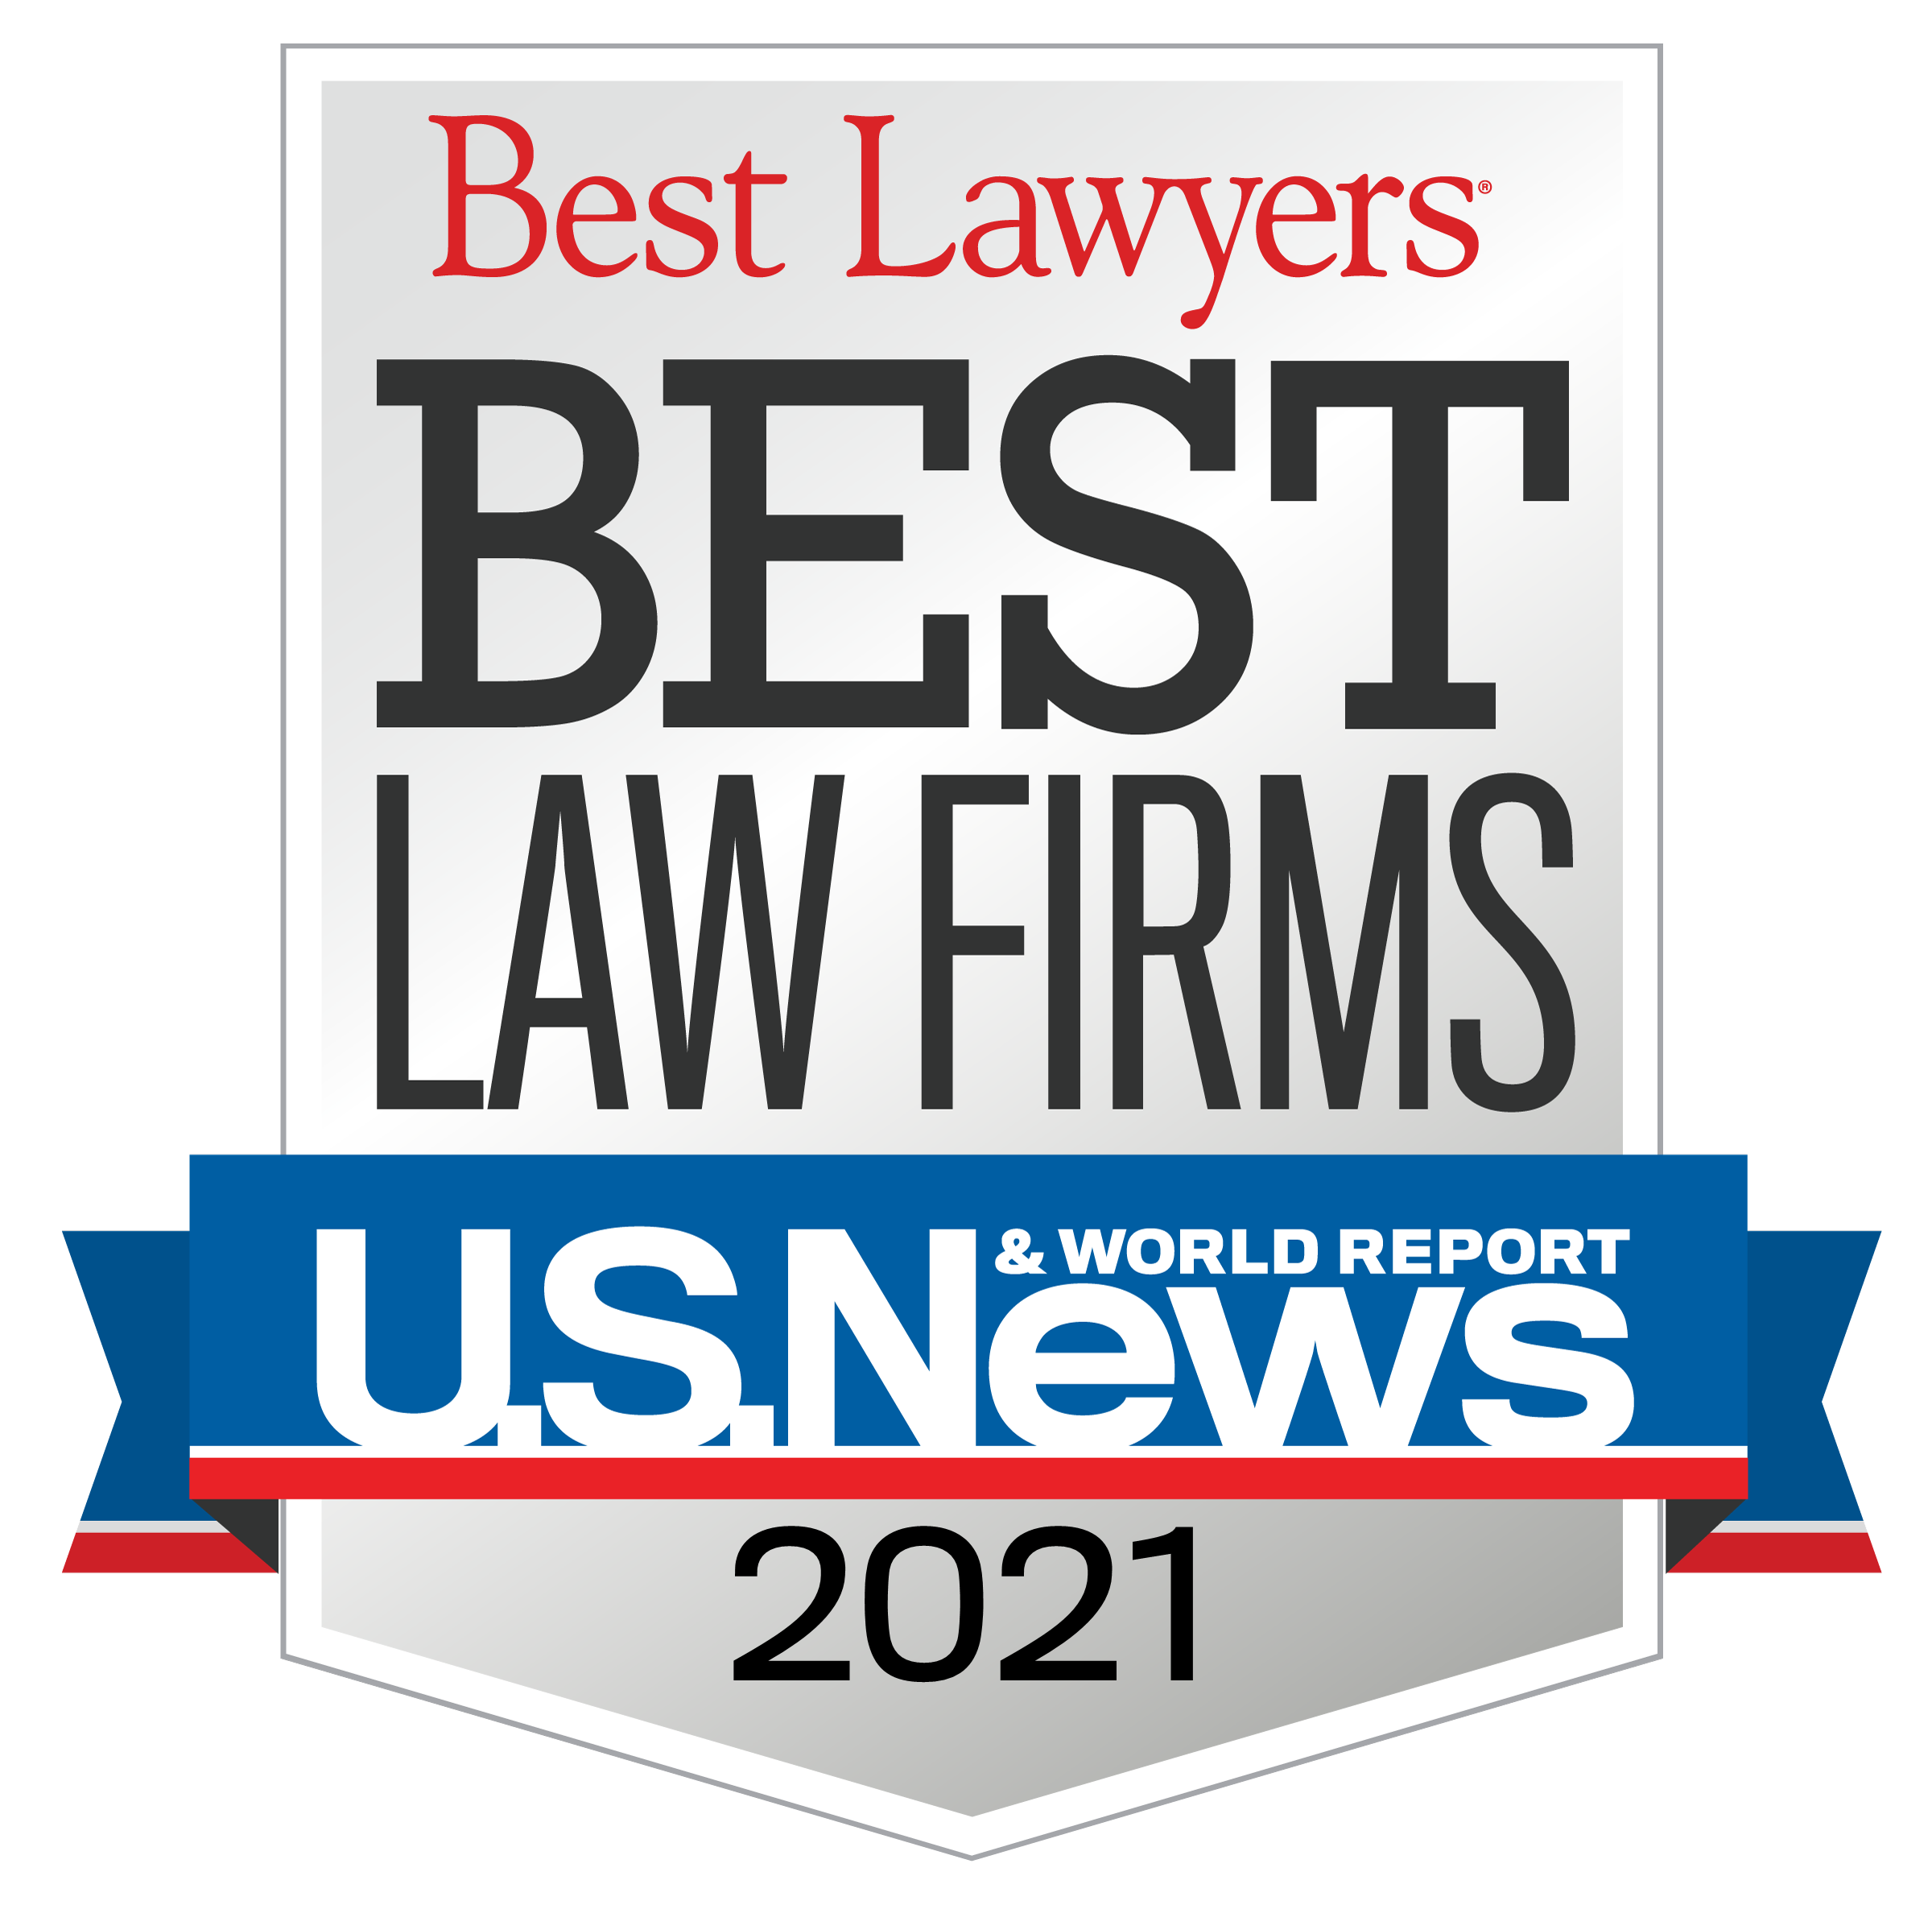 Best Law Firms Badge - 2021